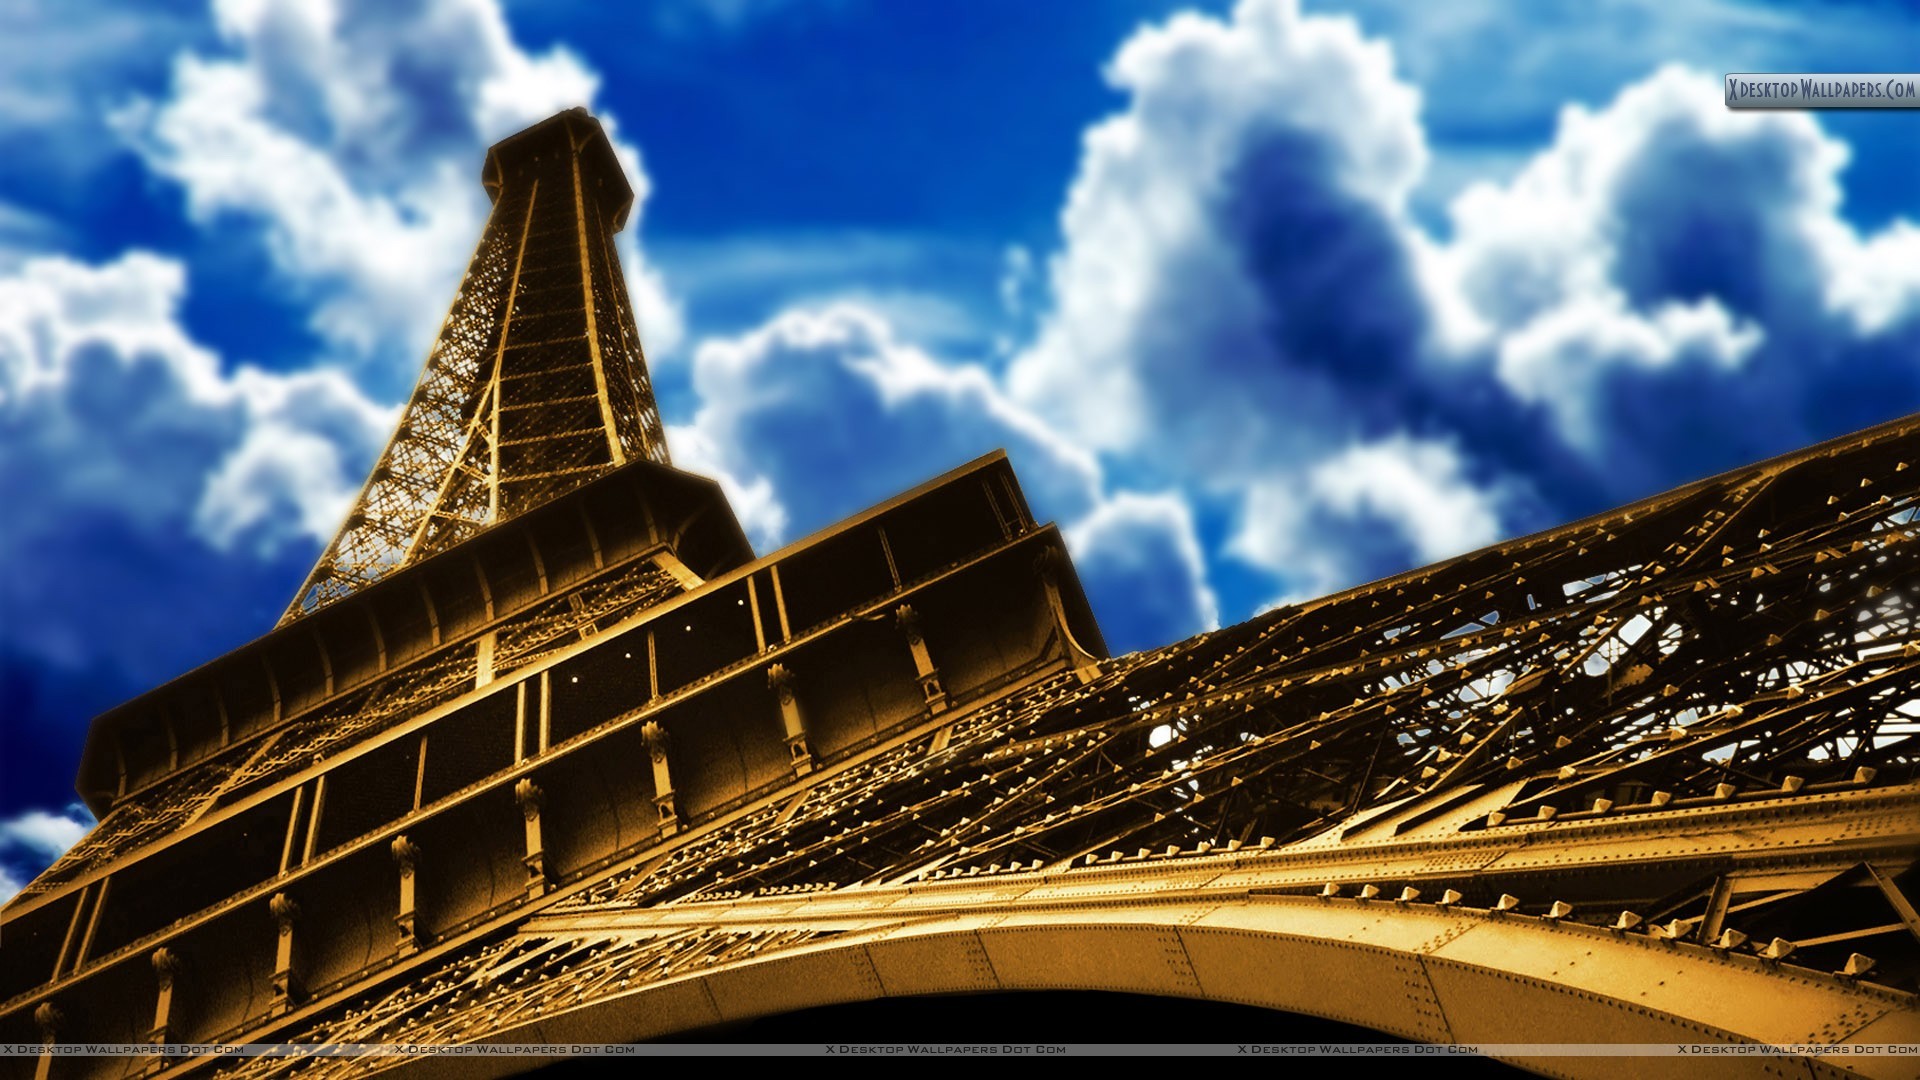 1920x1080 You are viewing wallpaper titled "Eiffel Tower ...